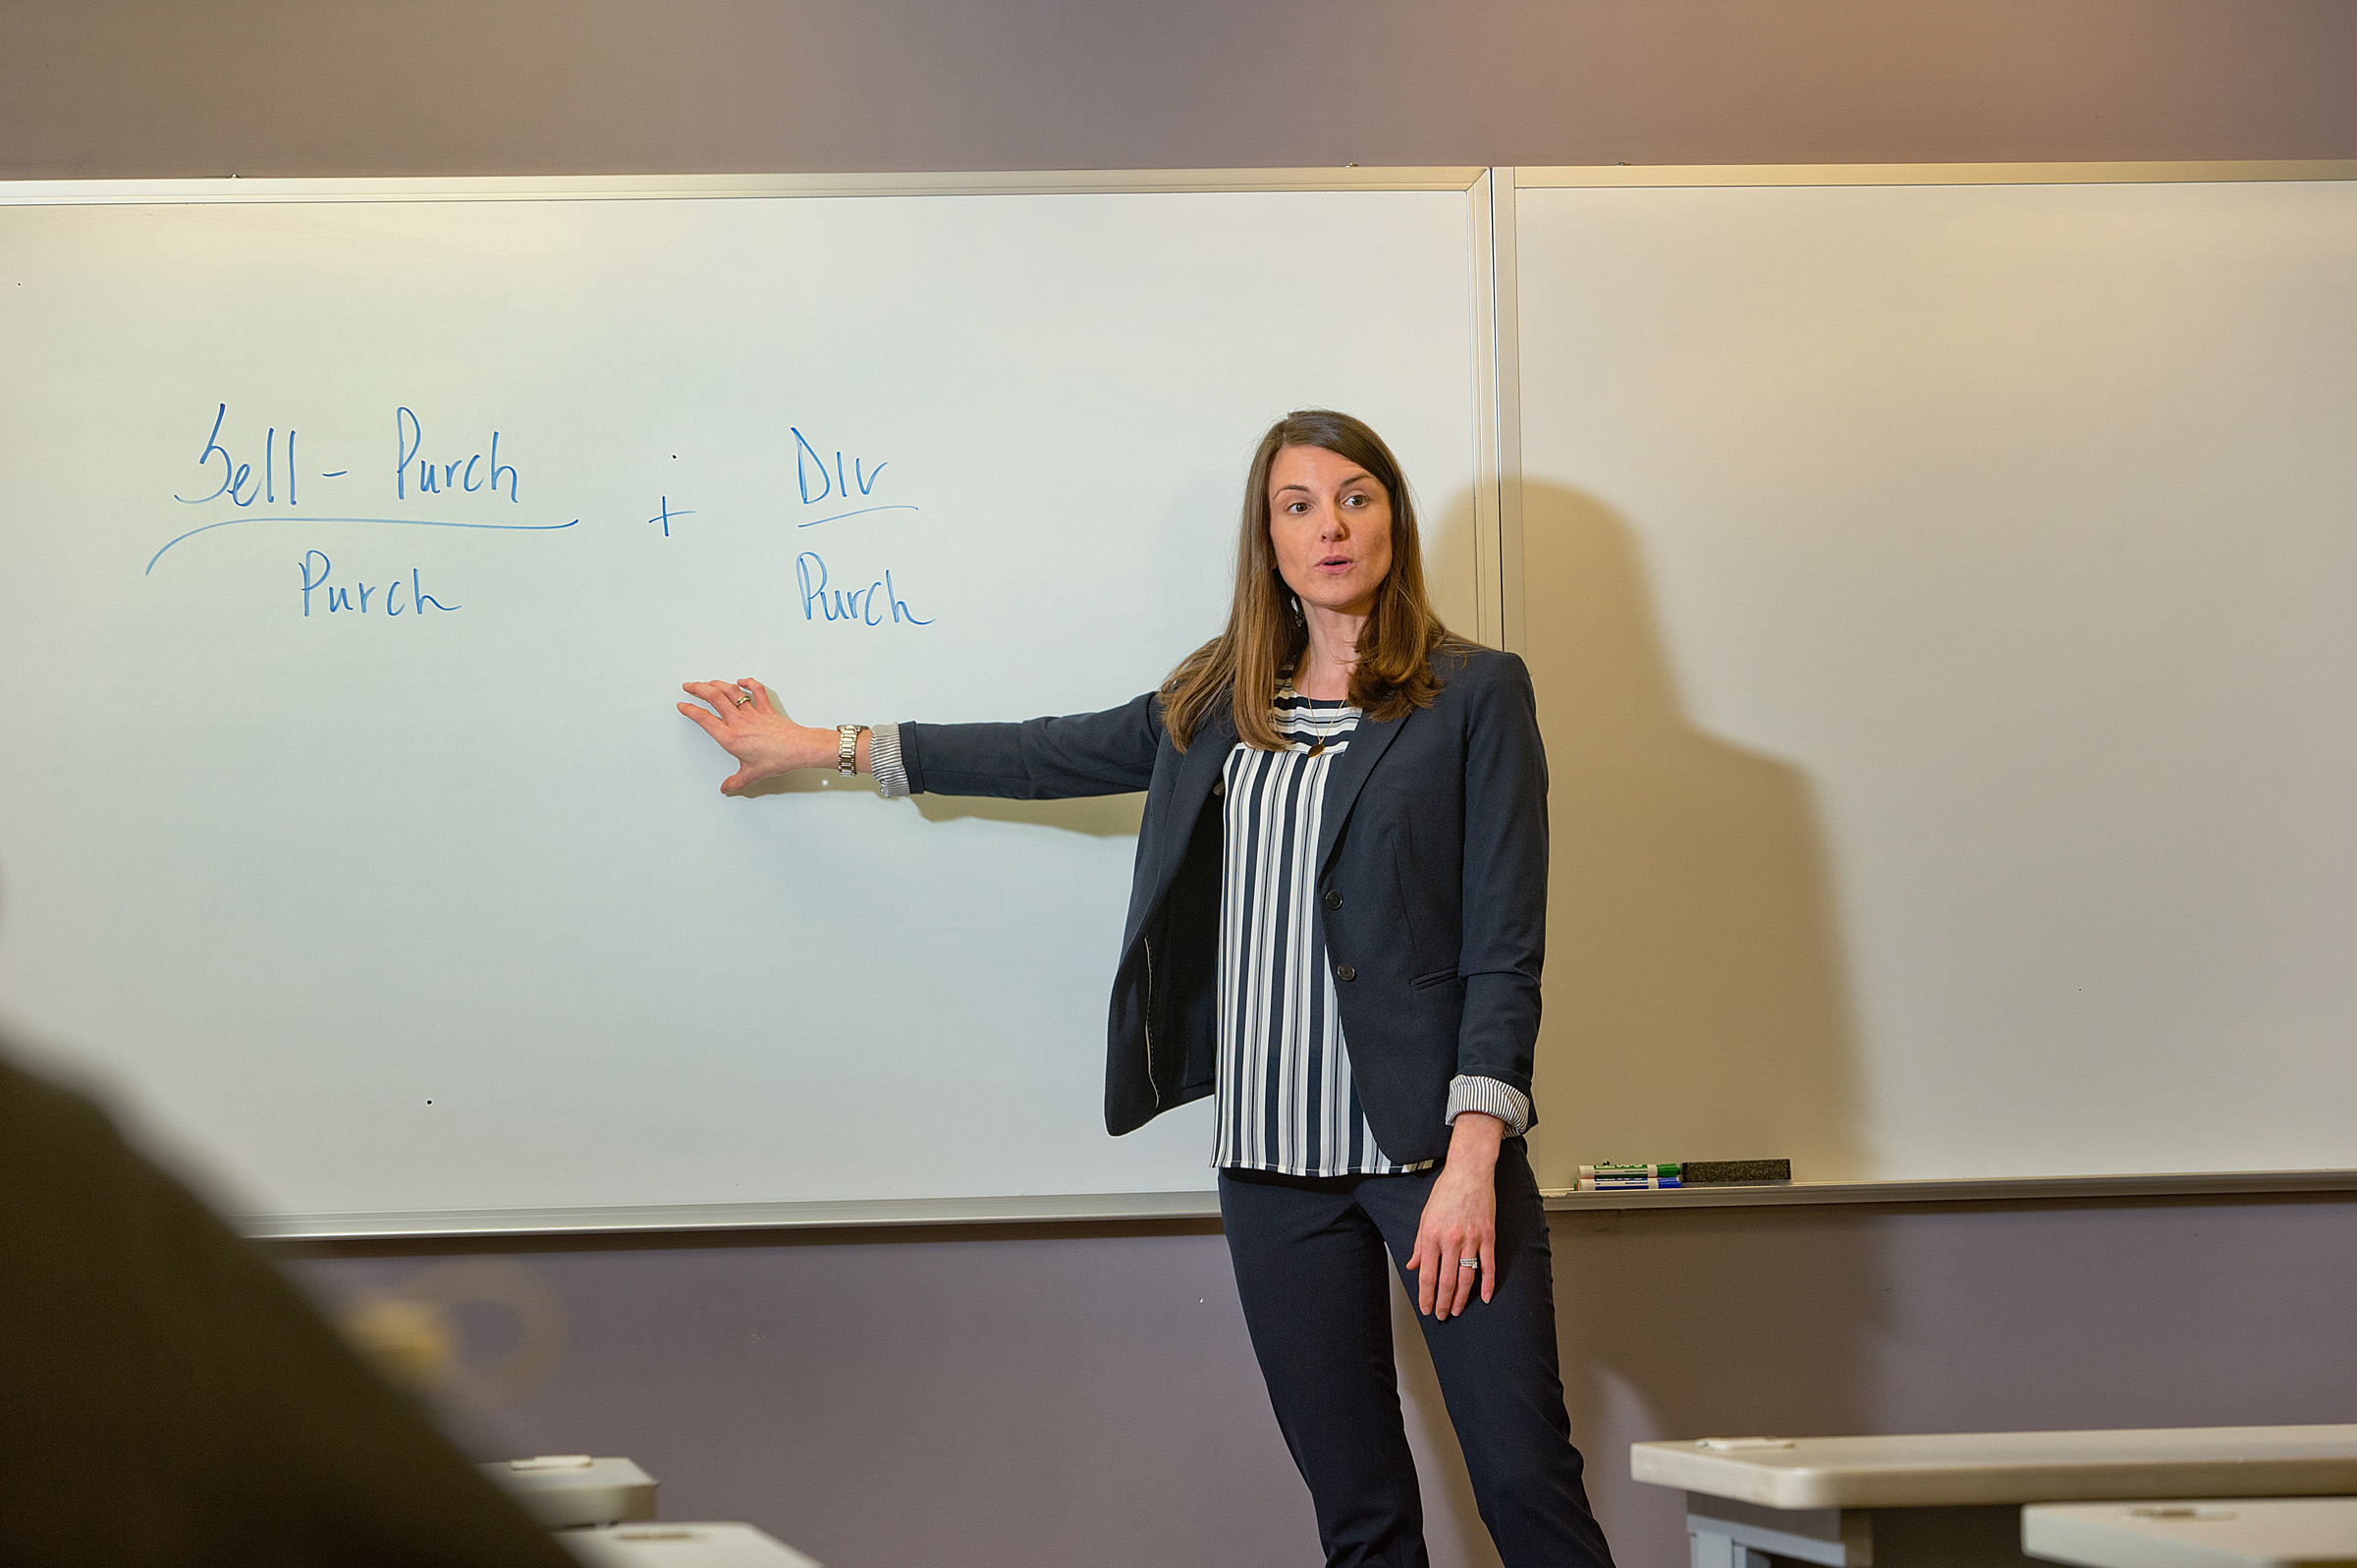 Professor teaching a class while pointing at a whiteboard 